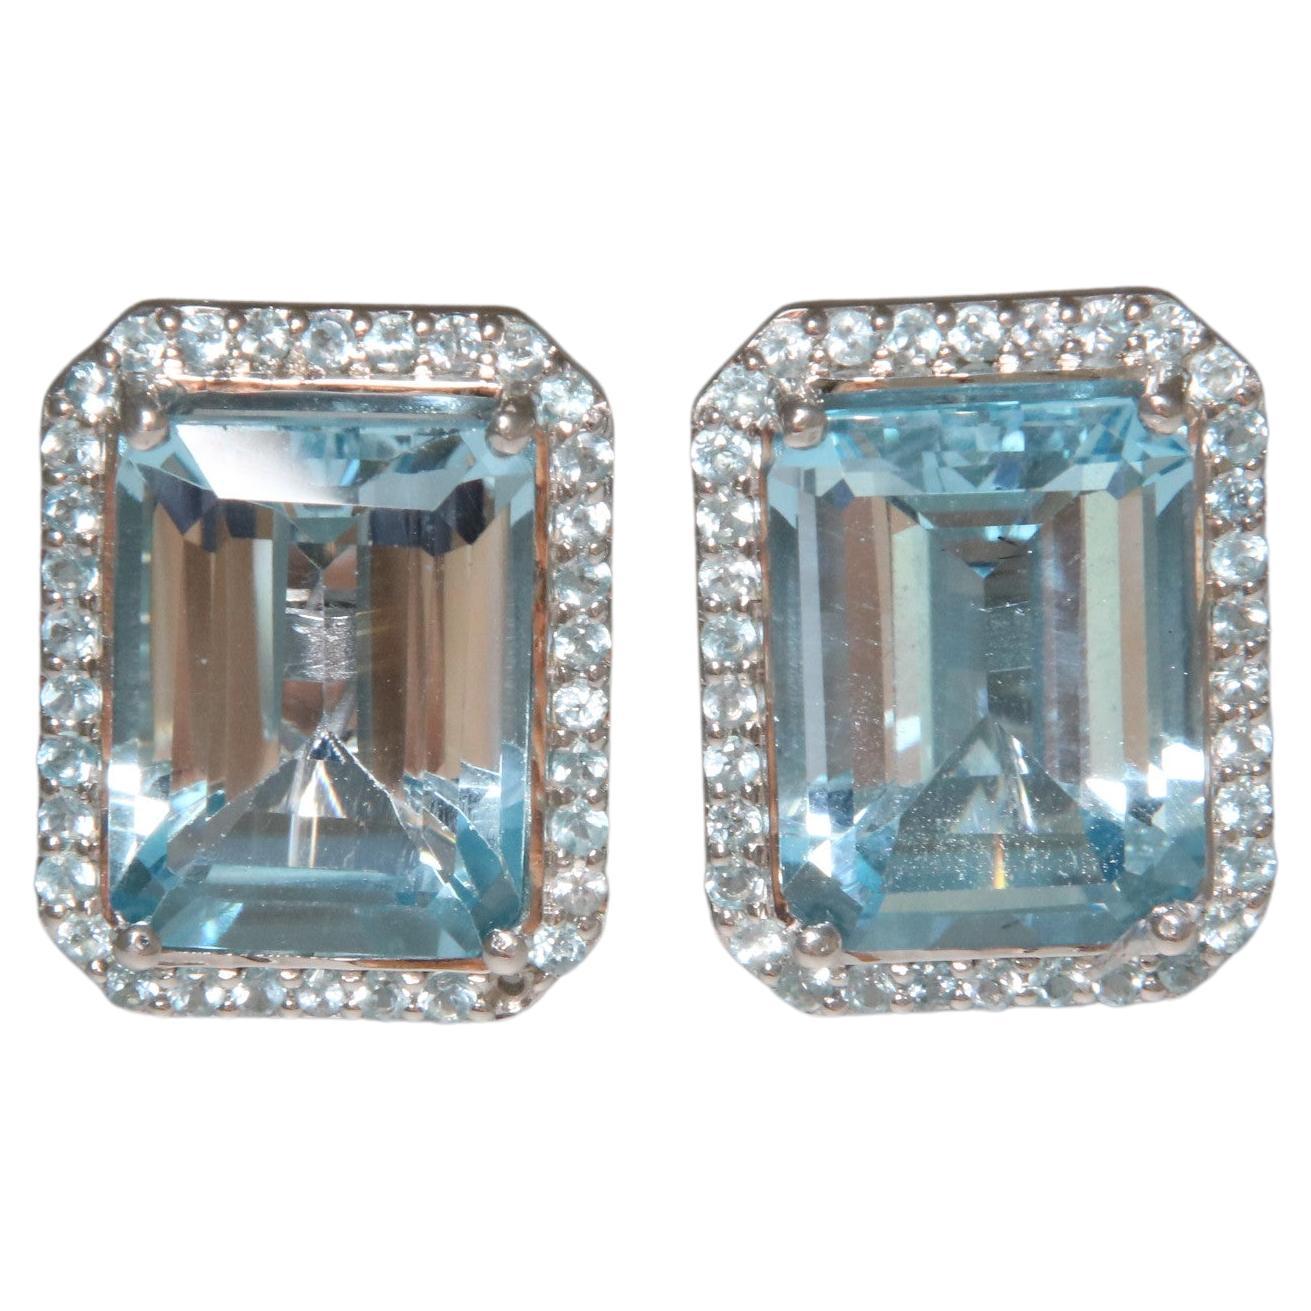 Orloff of Denmark; Blue Topaz Earrings fashioned out of 925 Sterling Silver.

This exquisite pair of earrings features radiant blue topaz gemstones, surrounded by a halo of light Swiss blue topaz, all meticulously set in 925 sterling silver. The